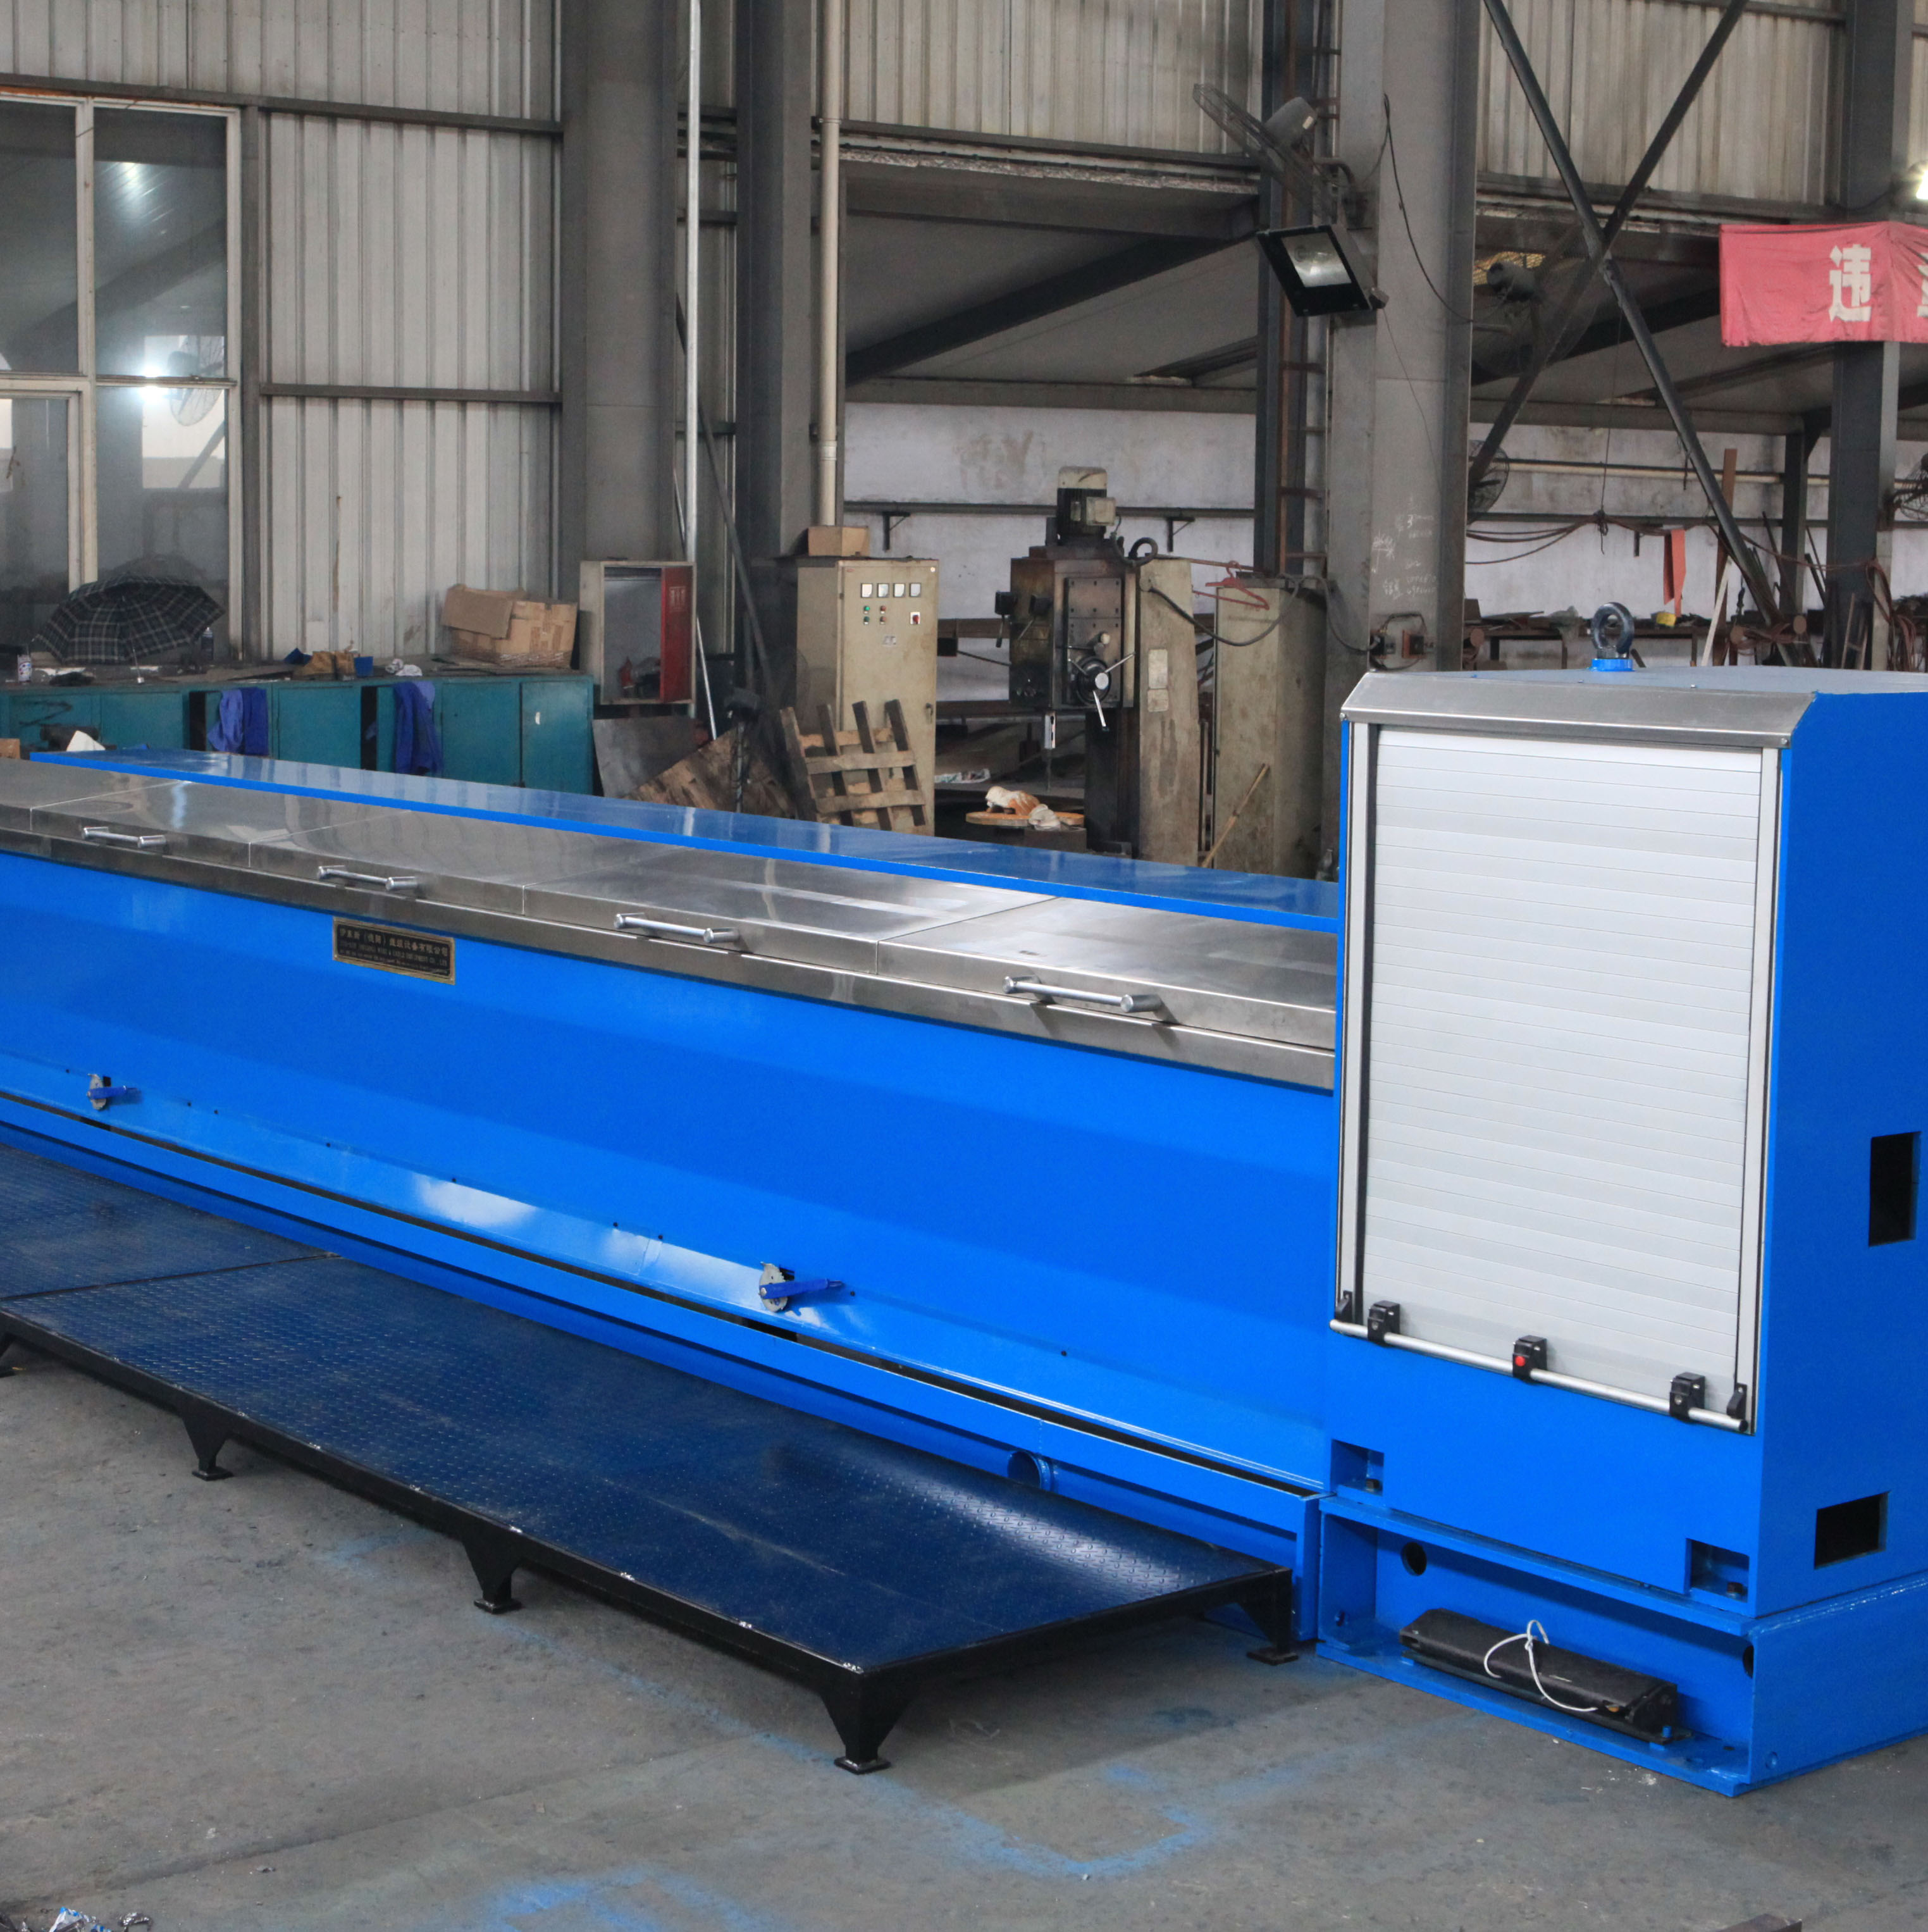 High-speed Copper Rod Breakdown Machine Type LHD-450/13  (with Pneumatic Dual Spooler)